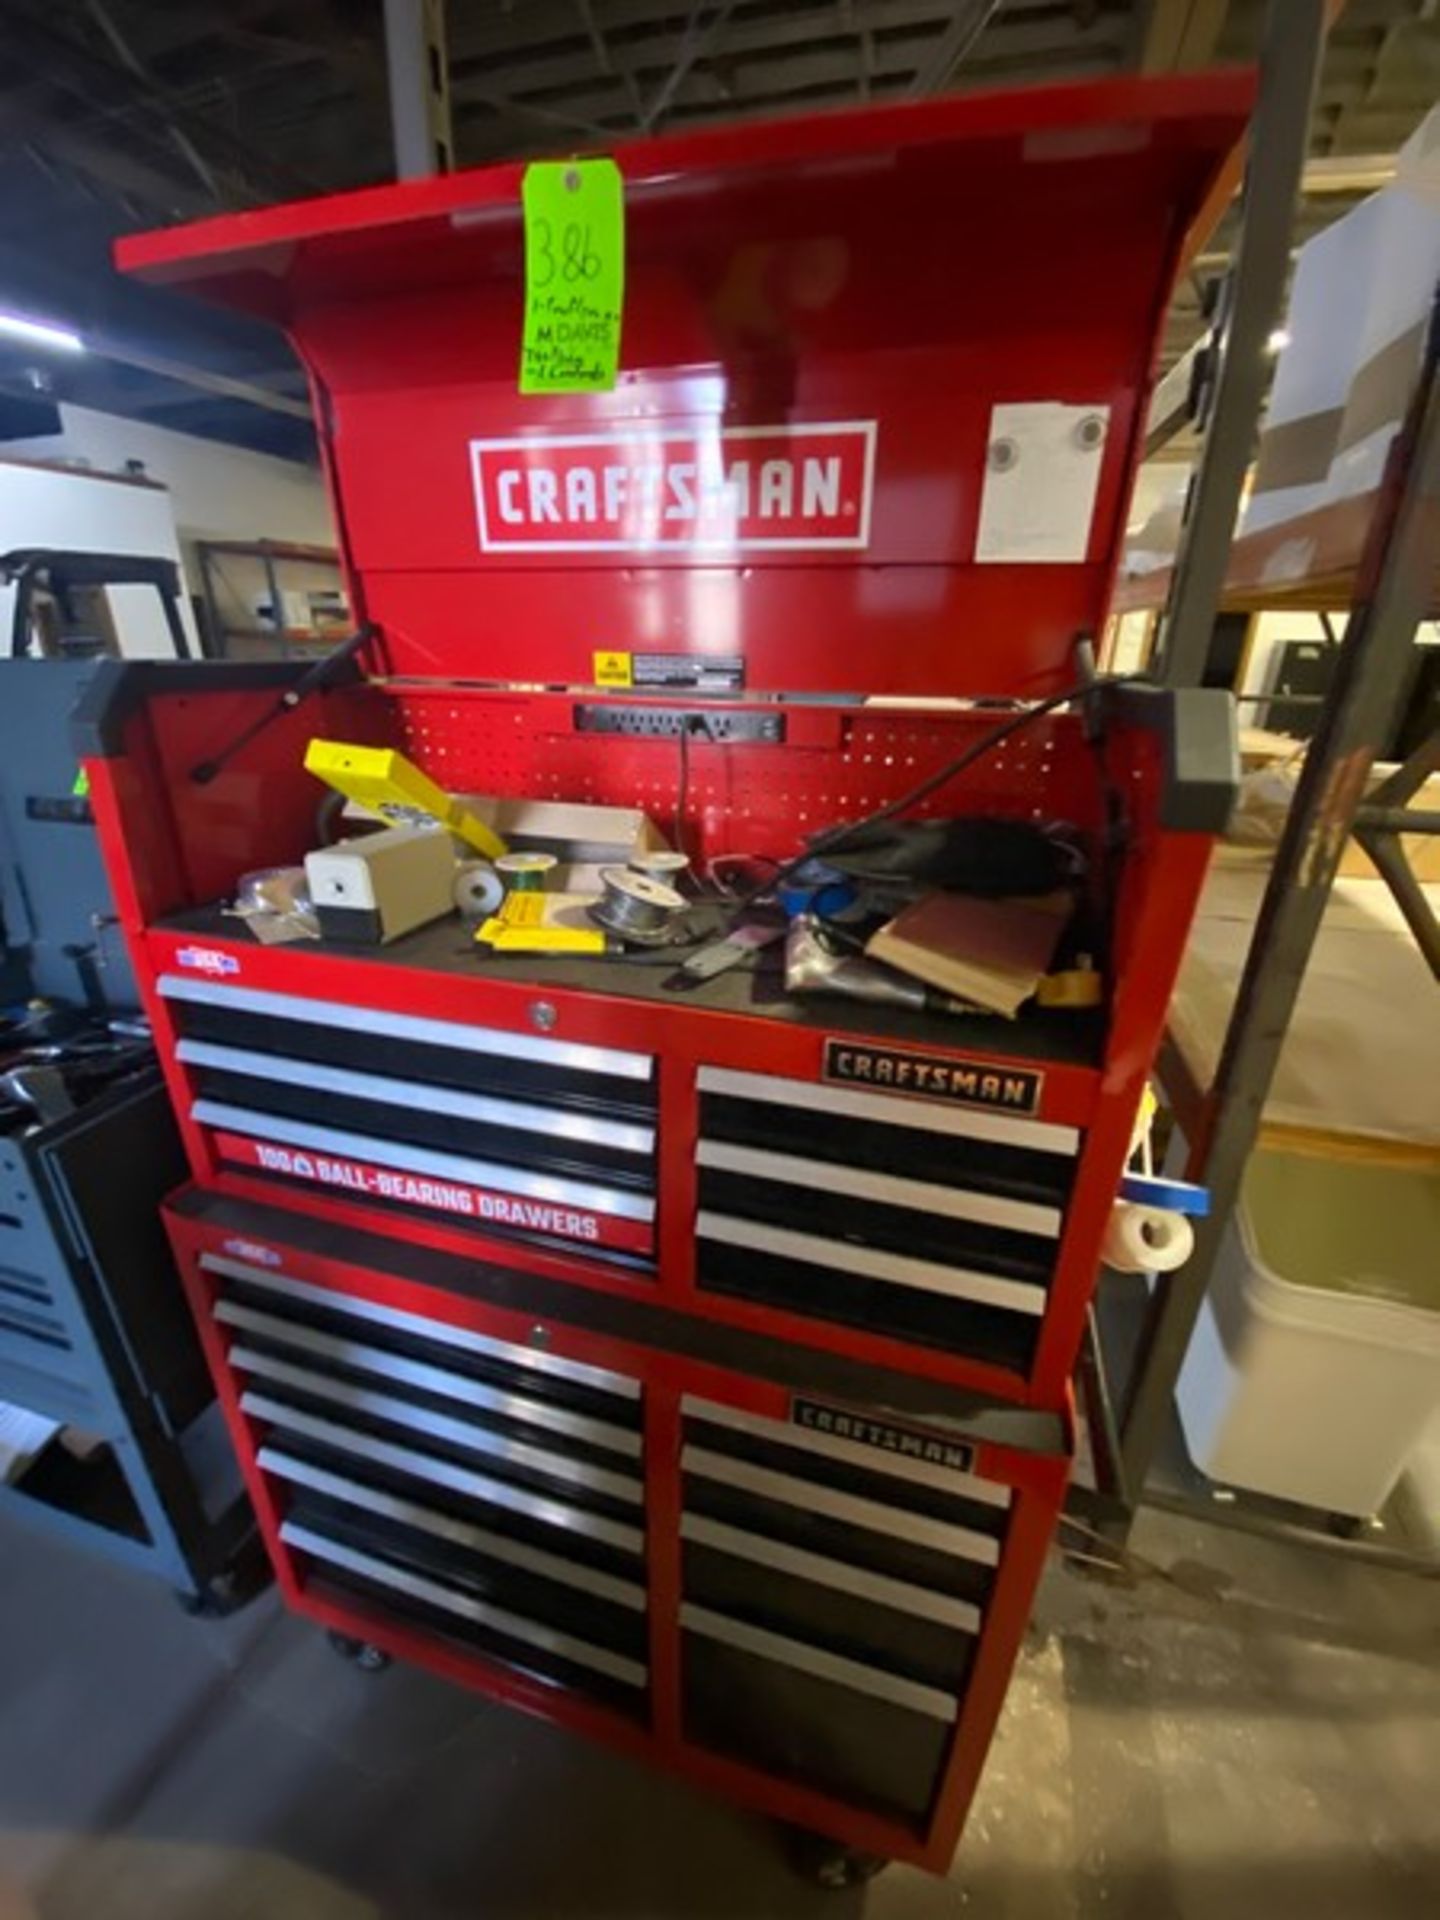 CRAFTSMAN PORTABLE TOOLBOX WITH CONTENTS, INCLUES MONKEY WRENCHES, WRENCHES, SCREW DRIVERS, & OTHER - Image 2 of 15